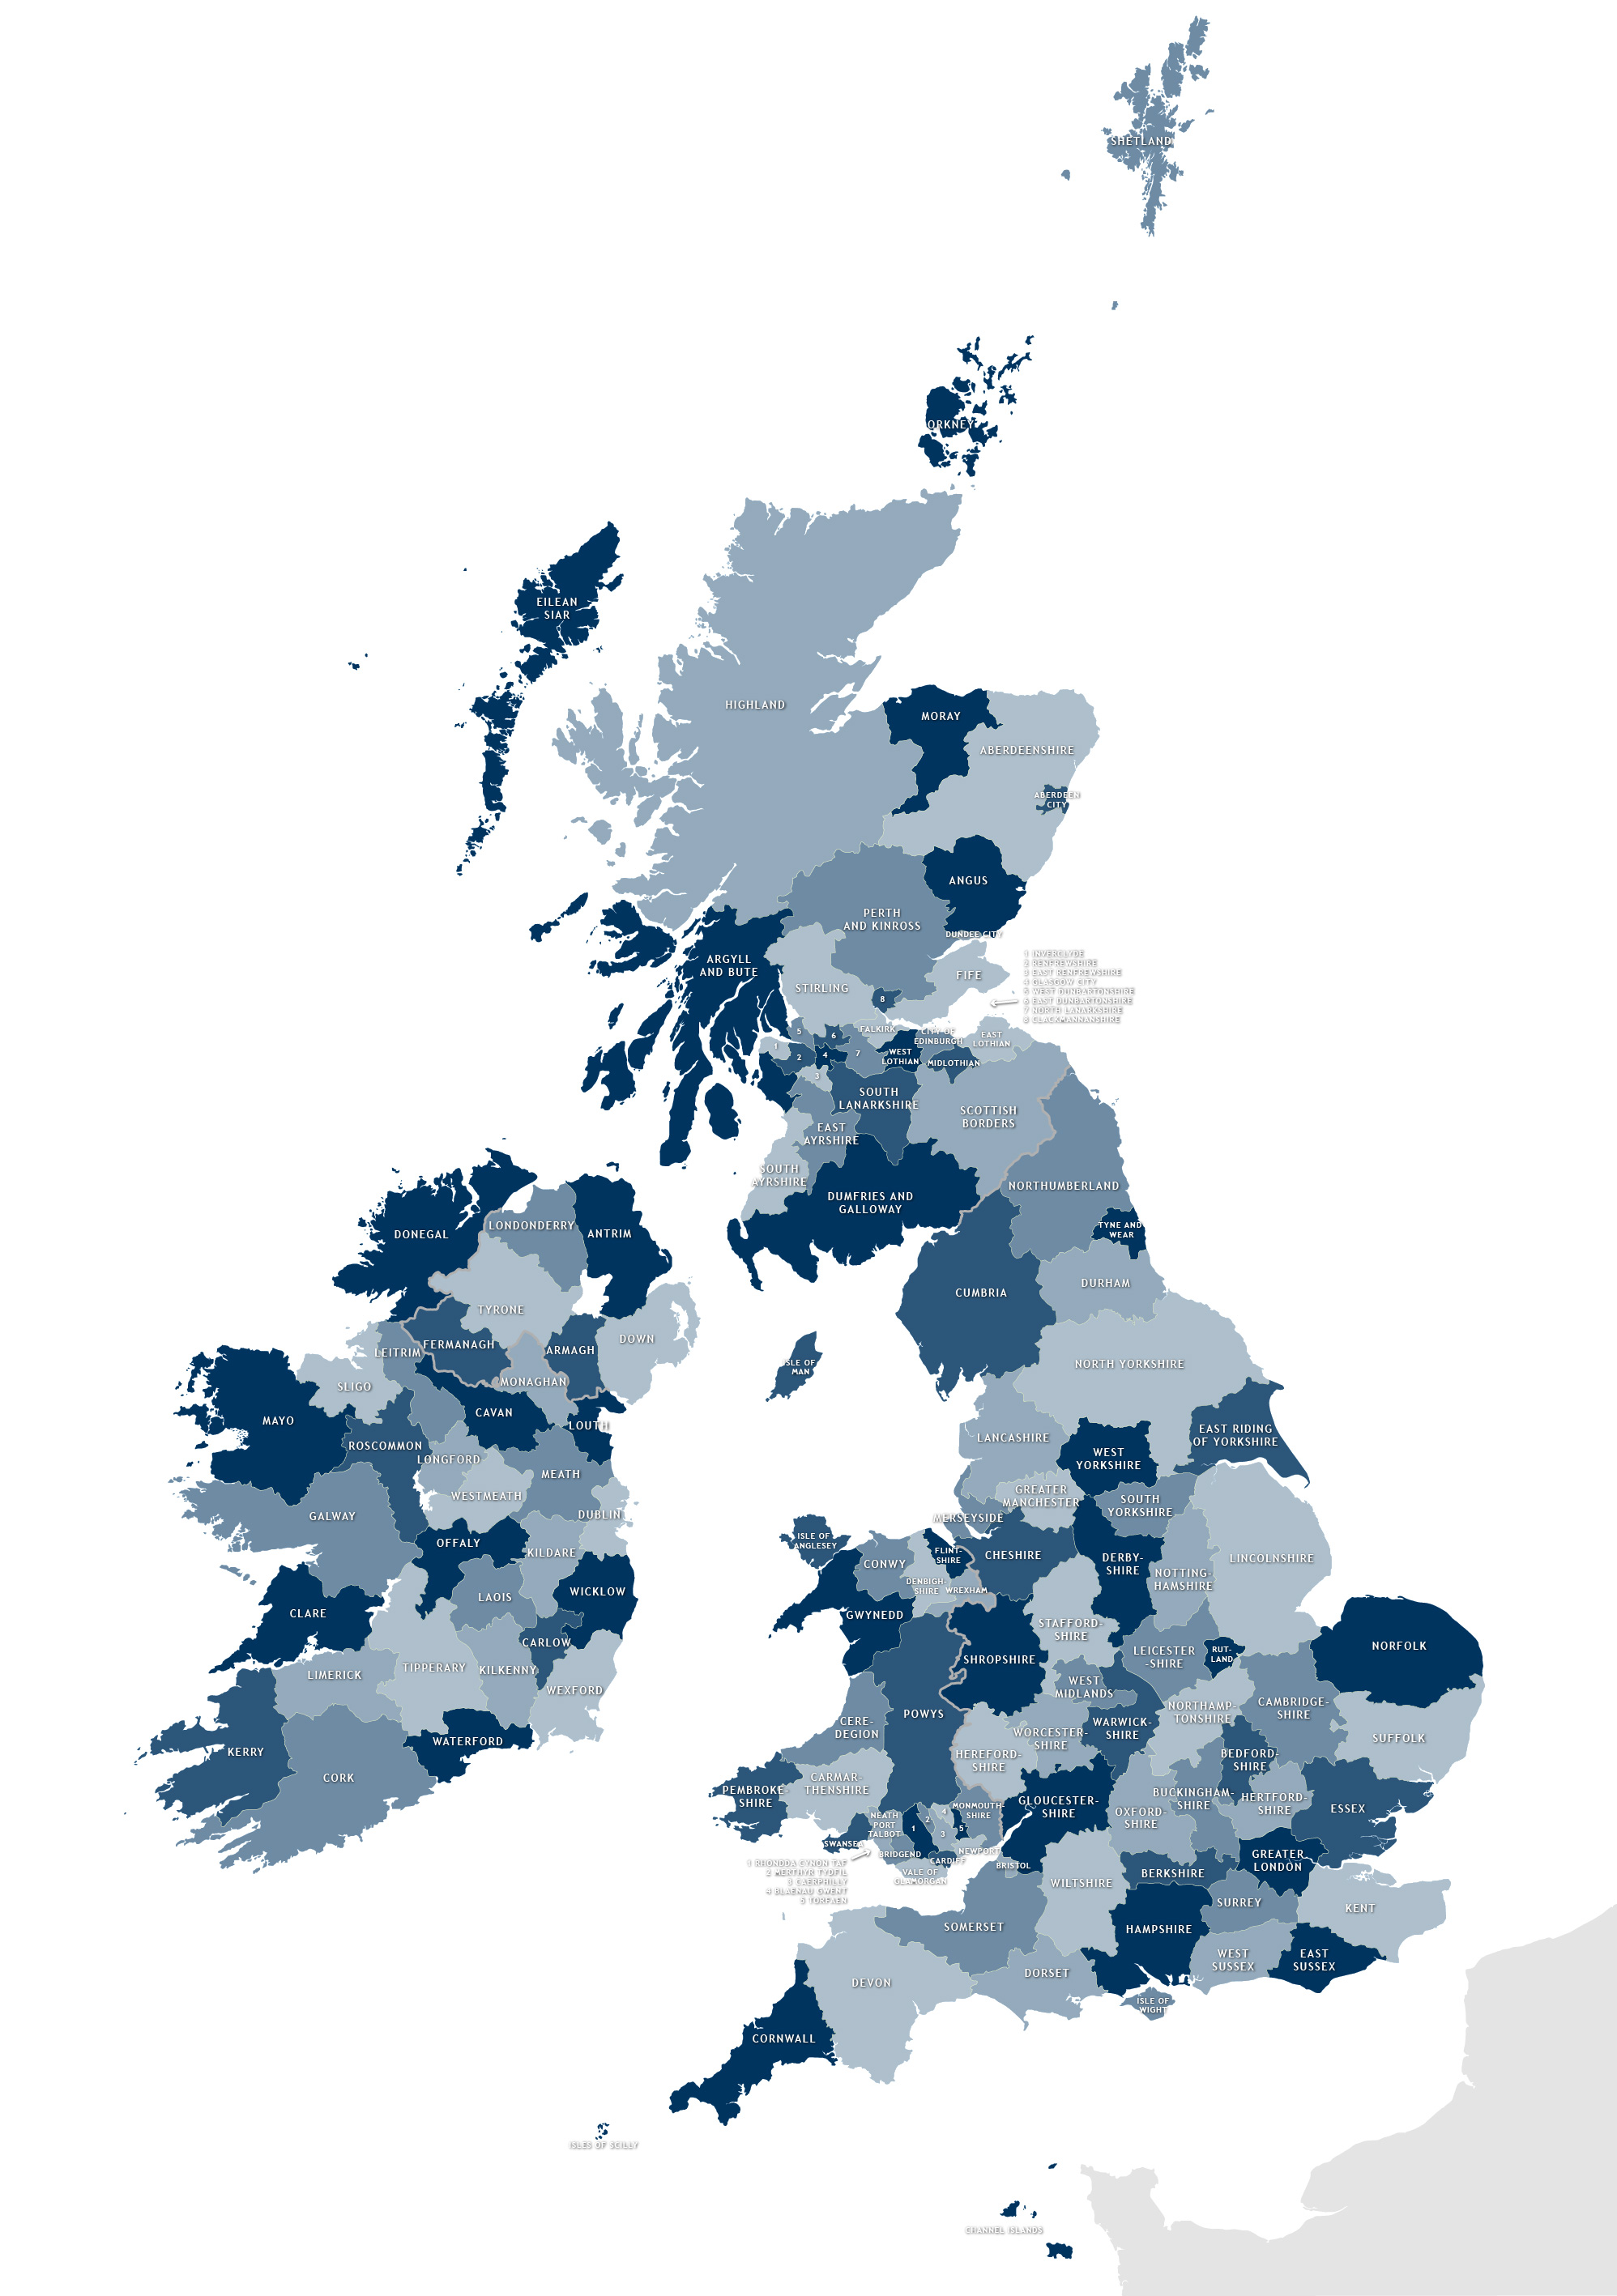 excel document of all cities in the uk